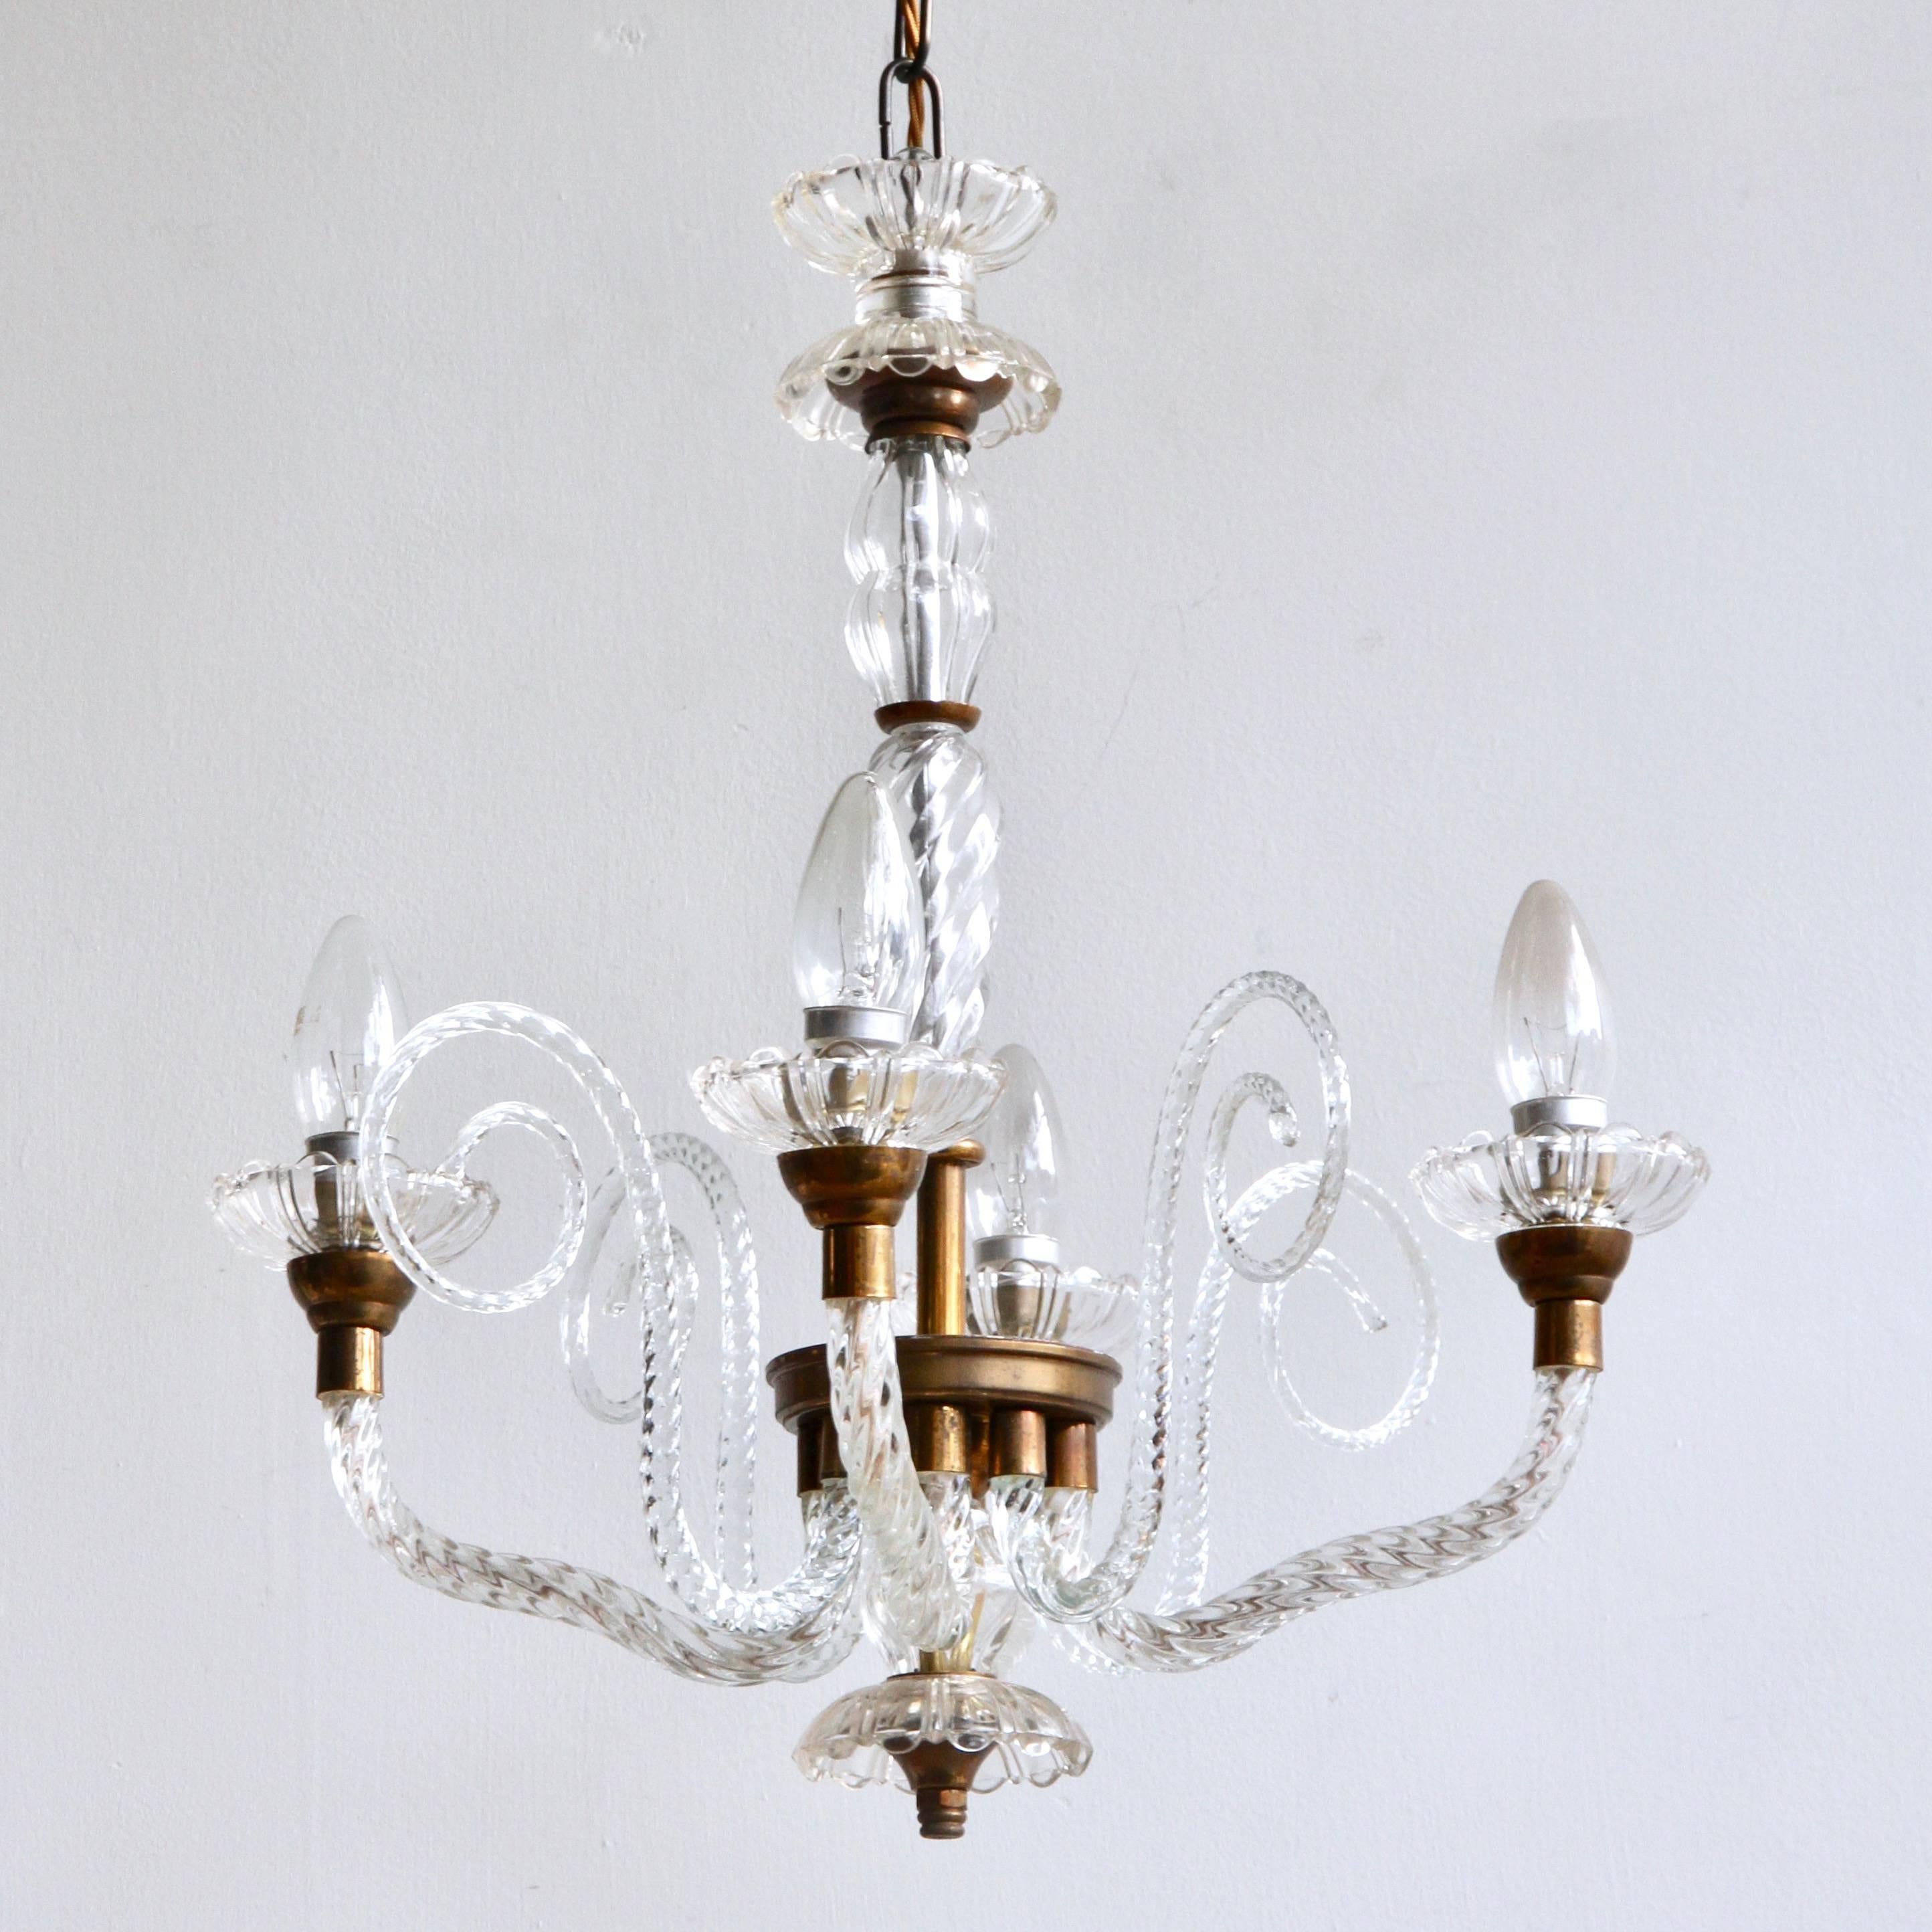 A four branch French glass chandelier dating from the 1930s. A beautifully proportioned chandelier with elegant details. The angle of the arms are unusual and are slightly elongated. There are four walking sticks with scrolling glass swirls in